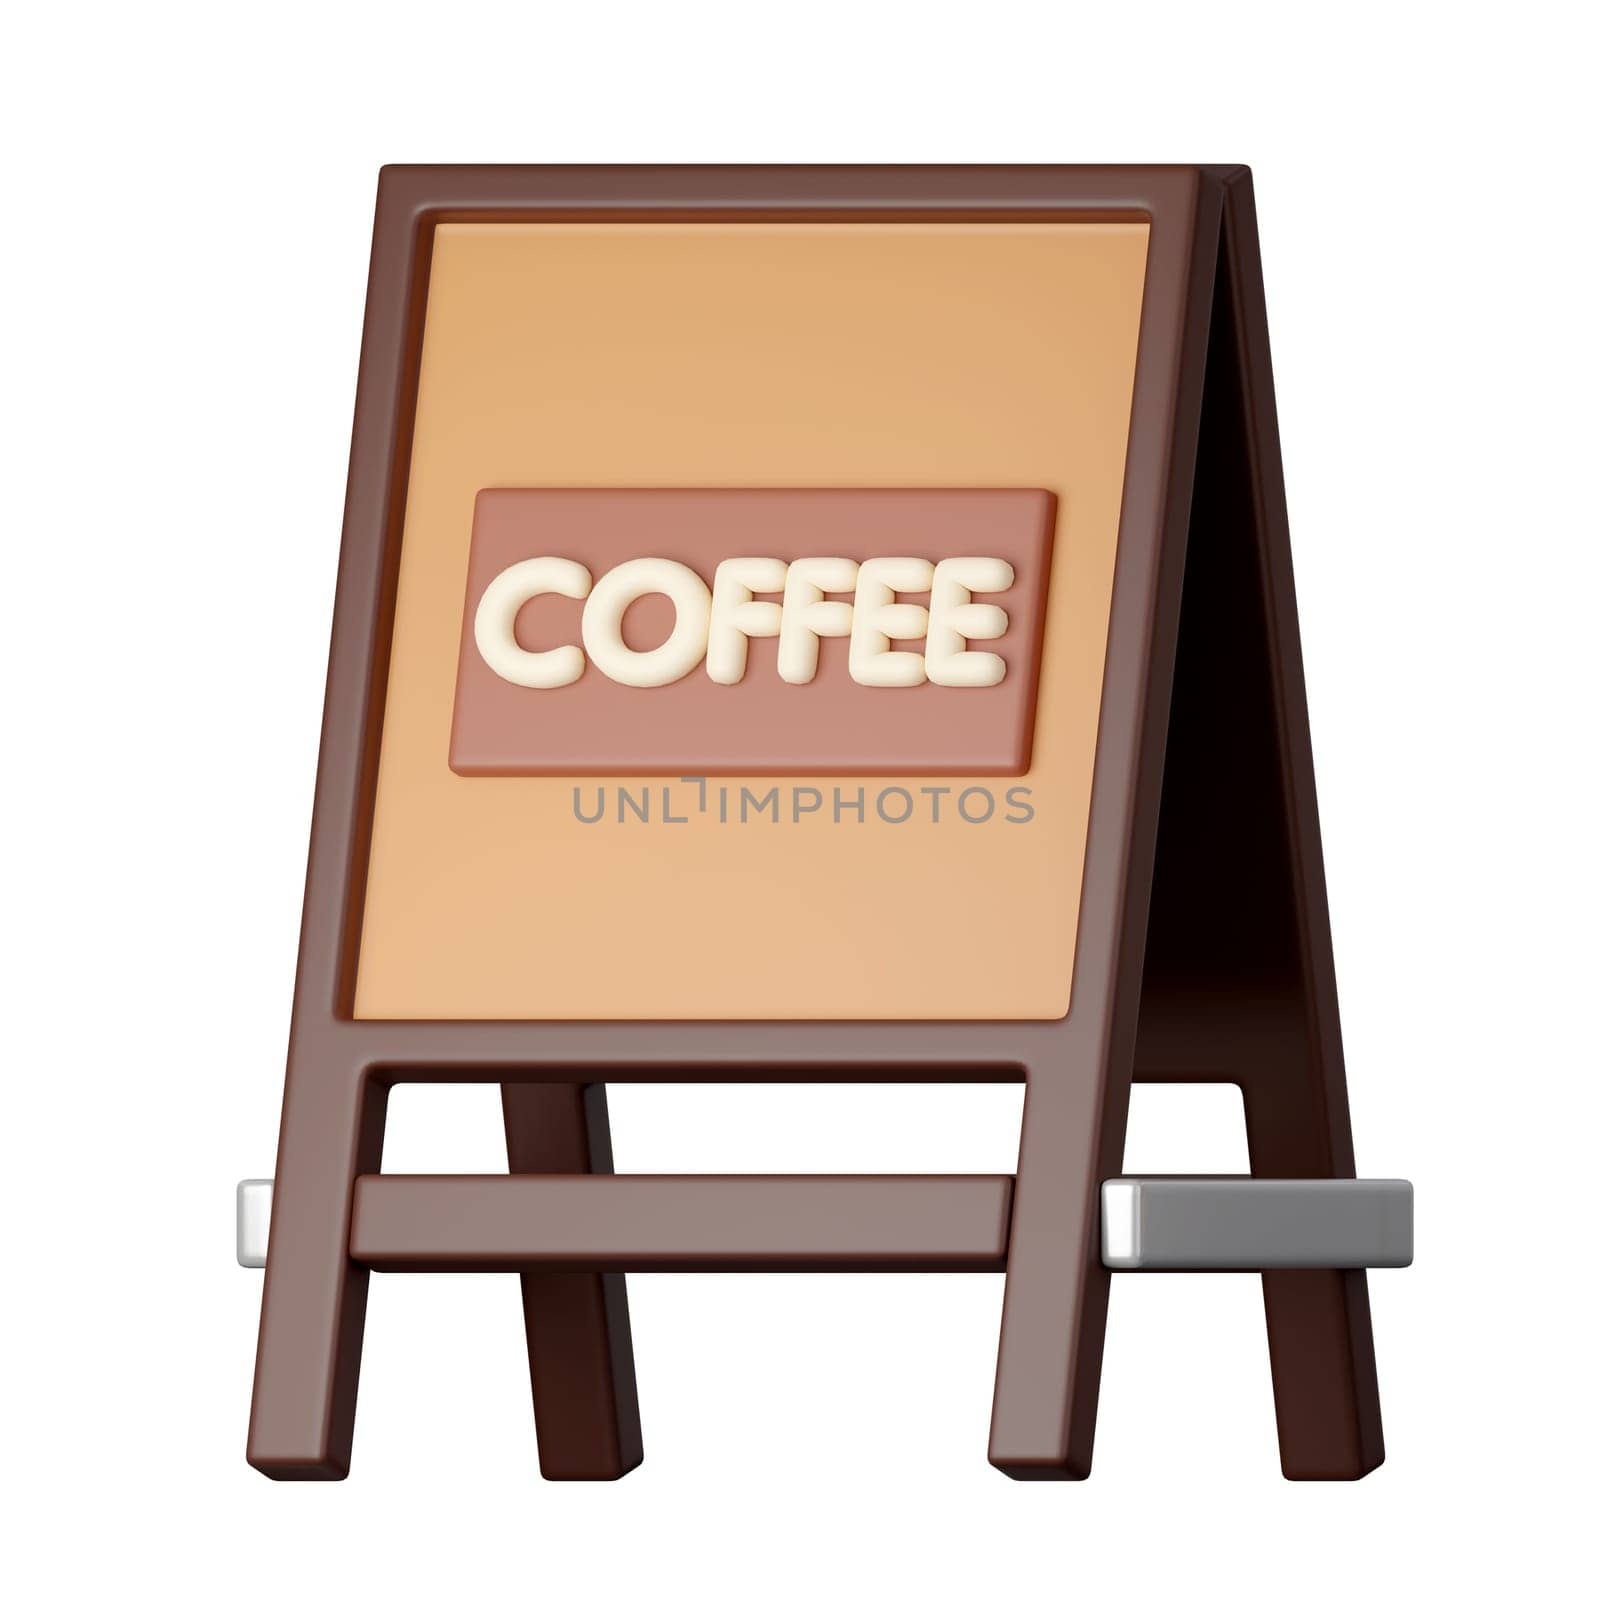 Coffee Shop Board Coffee sign outside 3d illustration by meepiangraphic